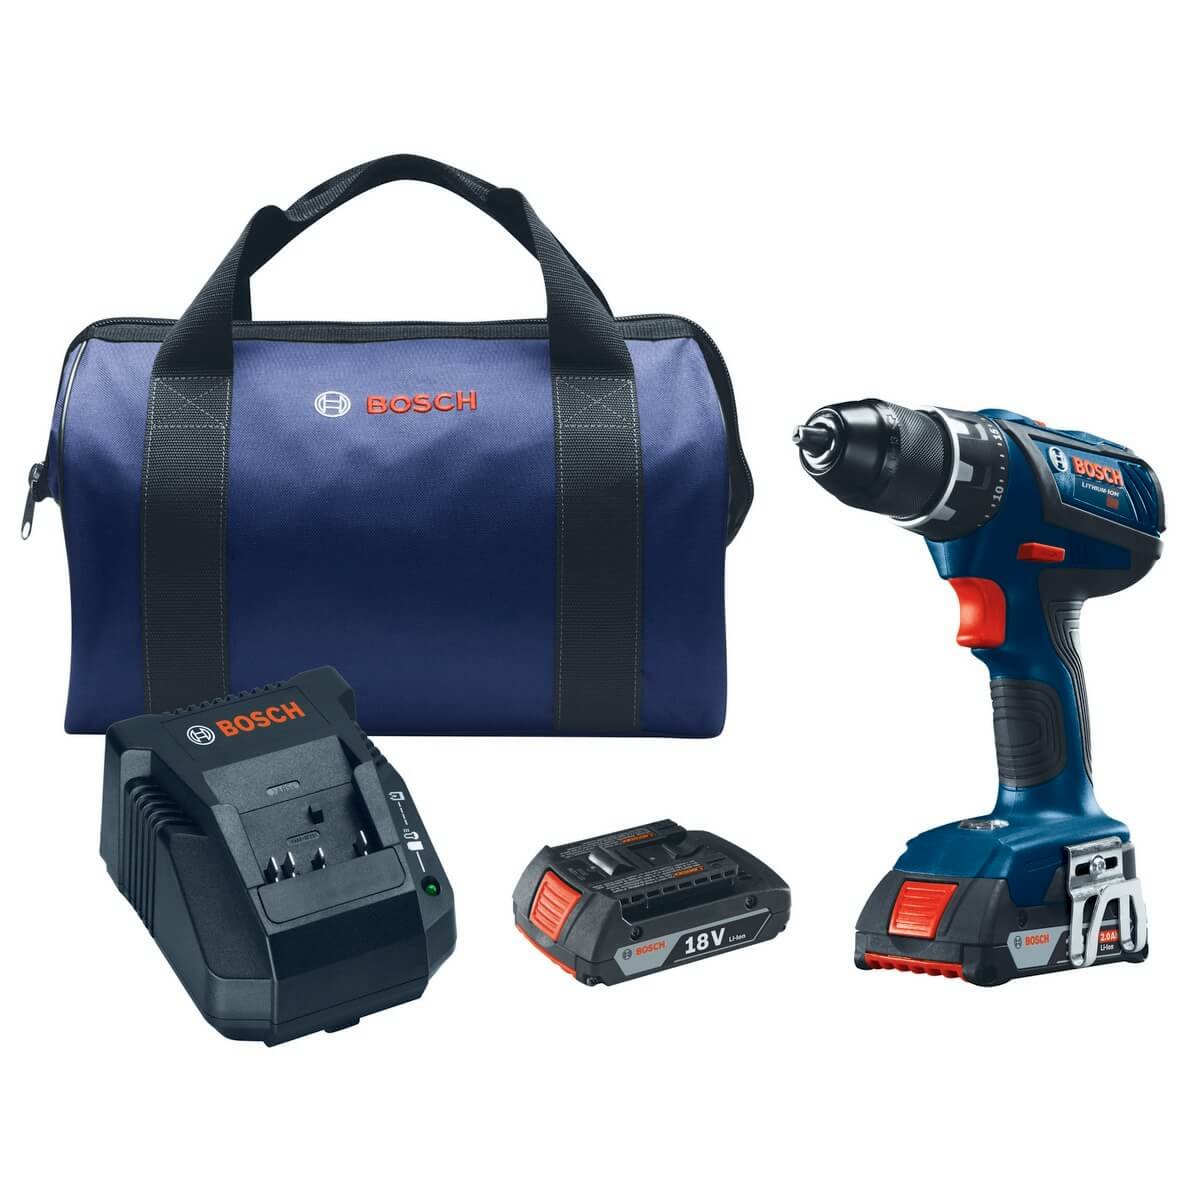 Bosch DDS181A-02 18V Compact Tough 1/2" Drill/Driver Kit with SlimPack Batteries